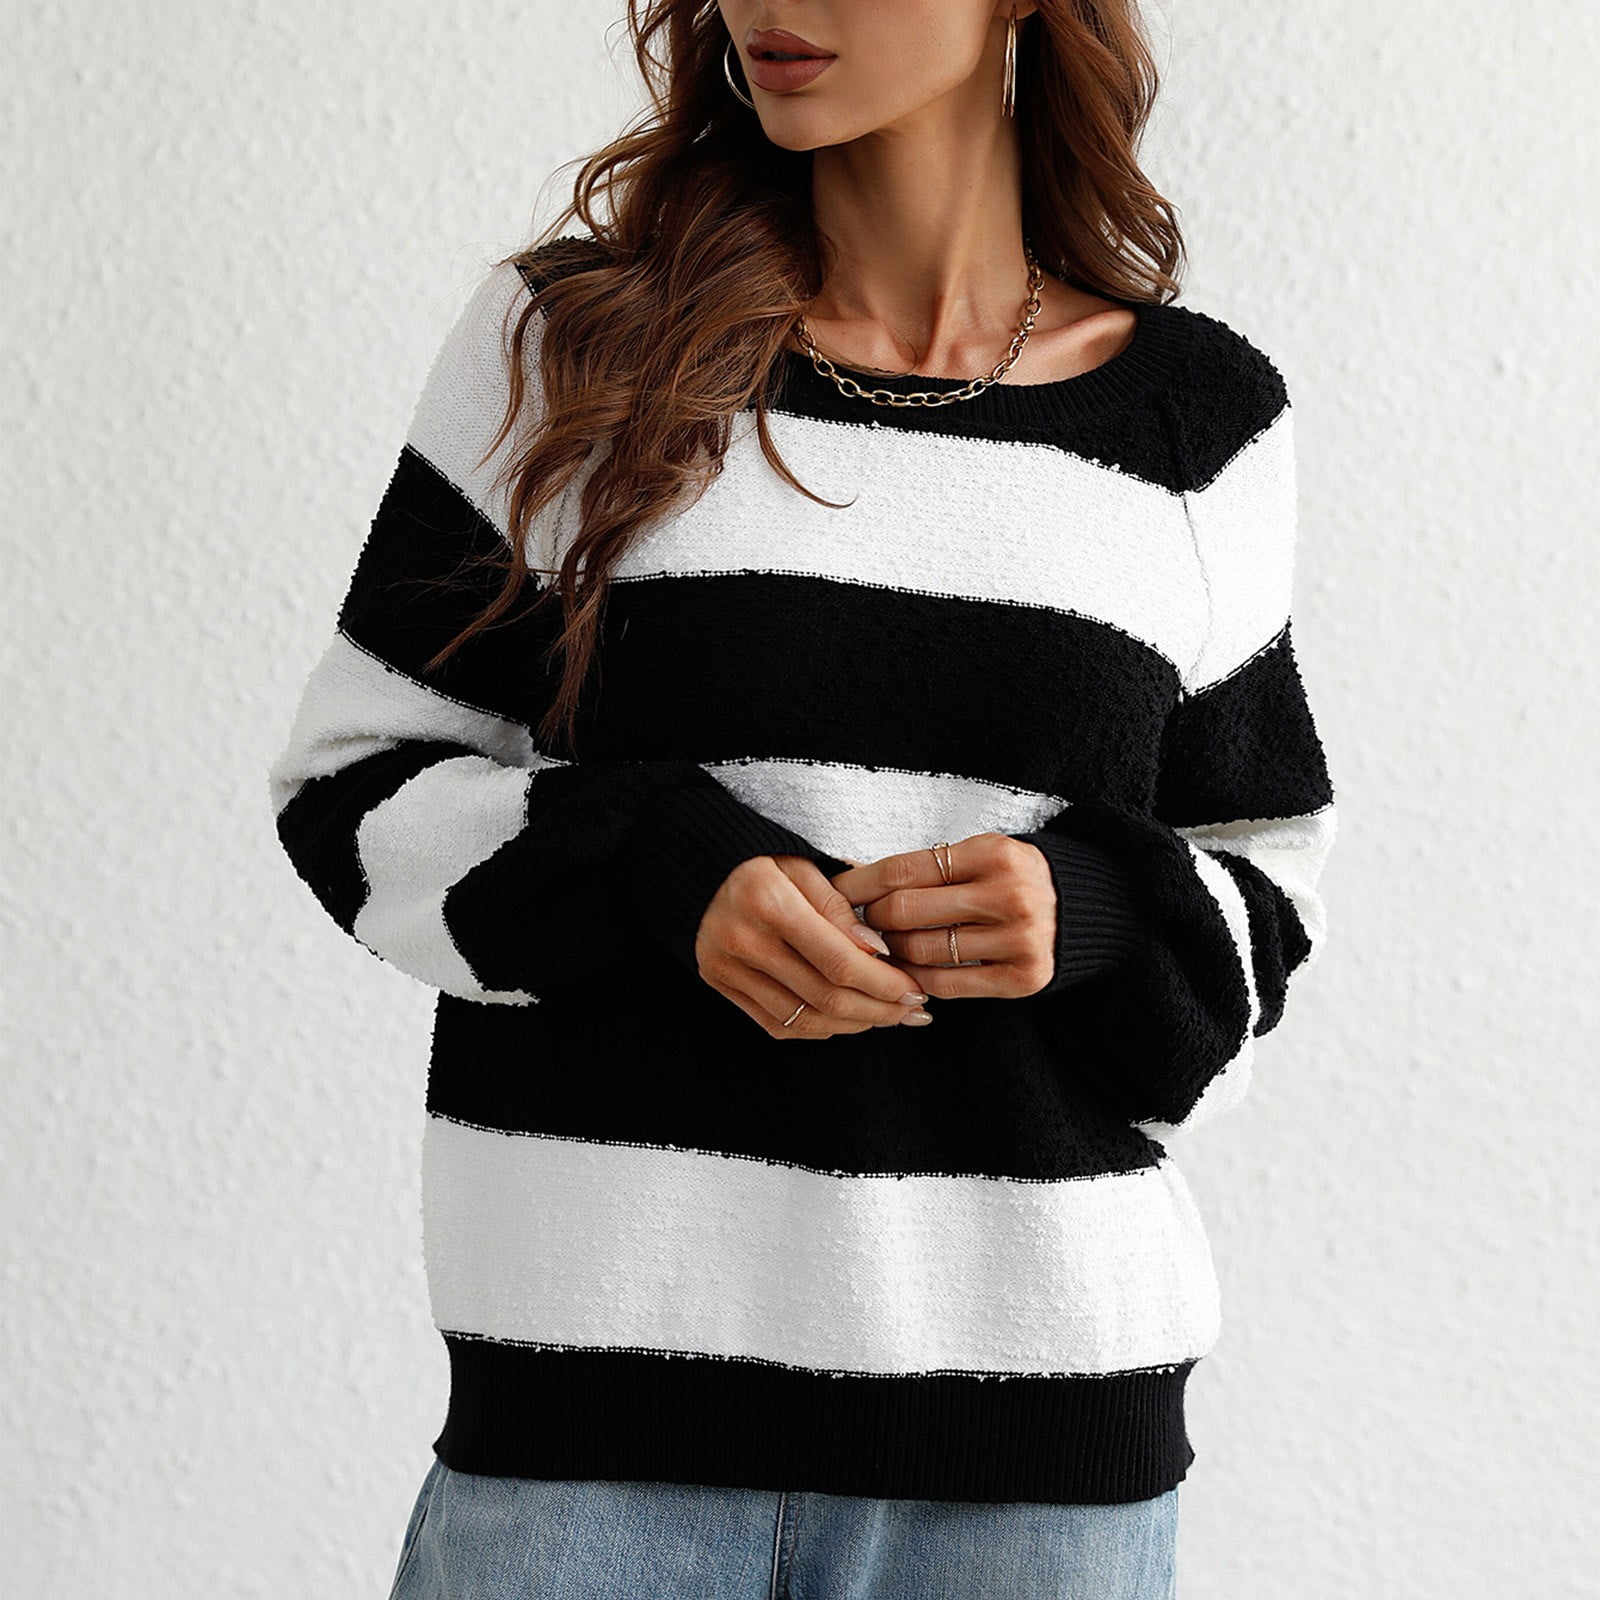 Cuhas Womens Fashion Sweaters for Women Plus Size Autumn And Winter  Splicing Knit Round Neck Long Sleeve Striped Sweatshirts for Women Black 1X  